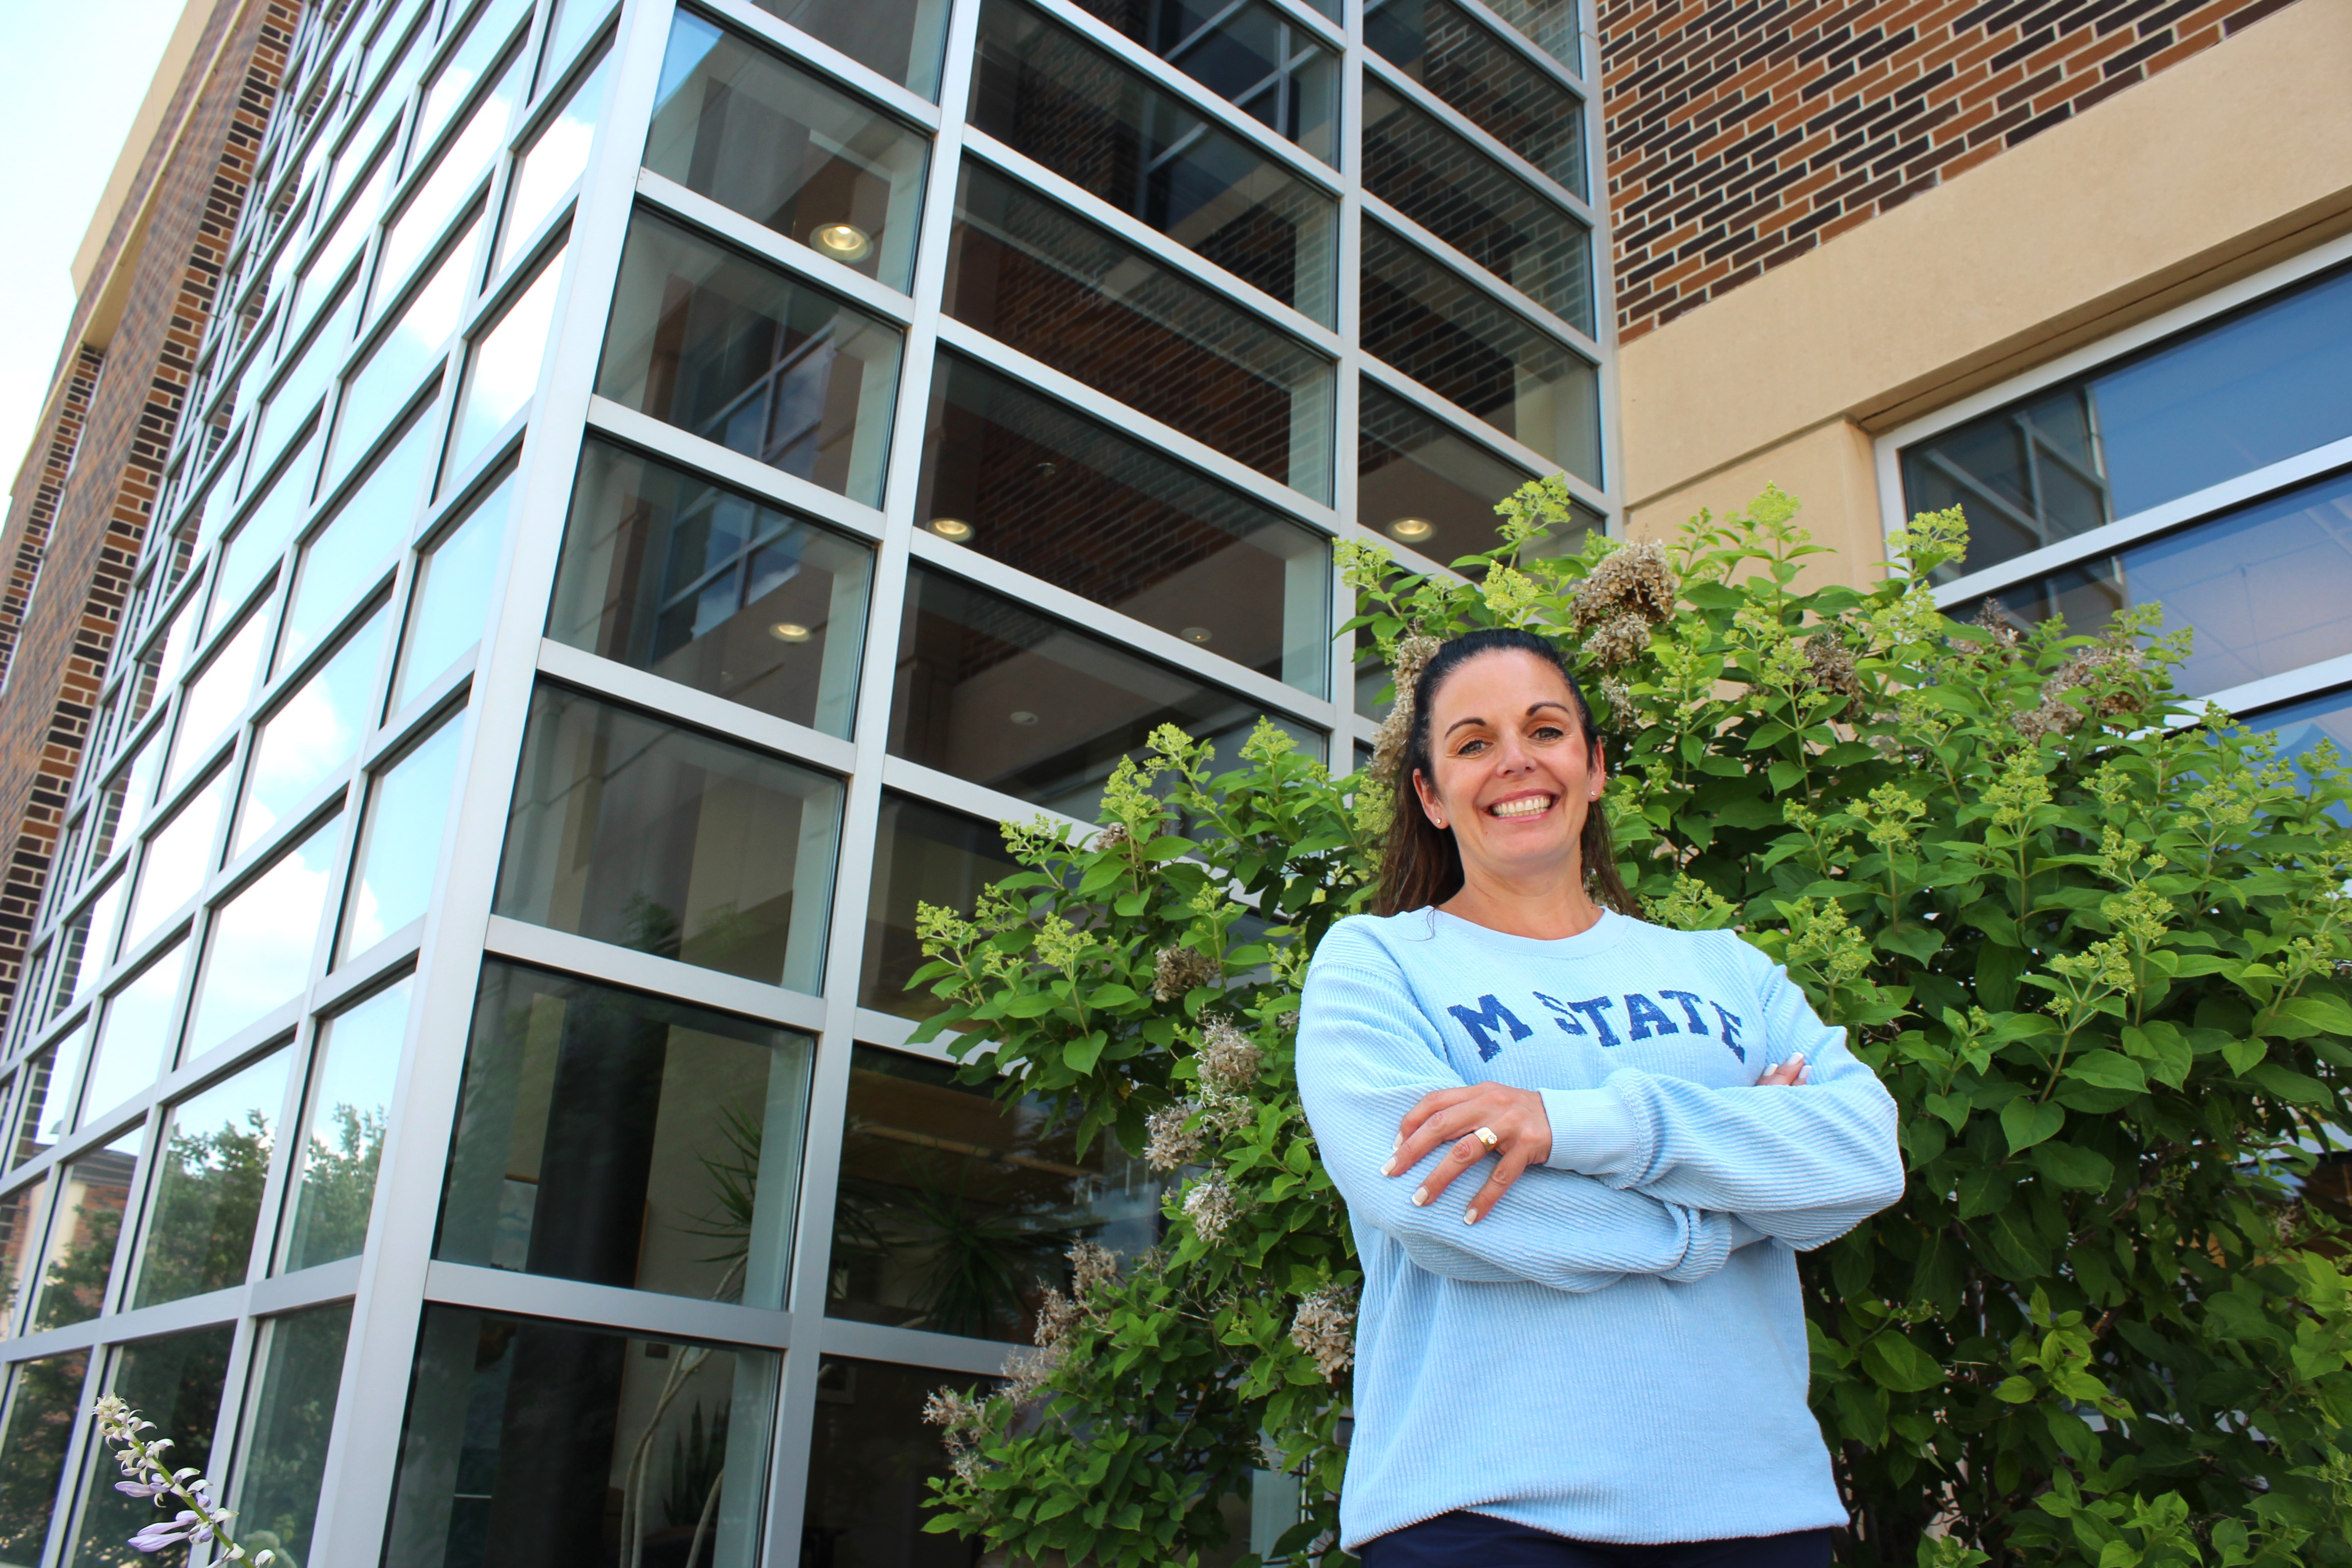 M State President Carrie Brimhall, outside the Moorhead campus